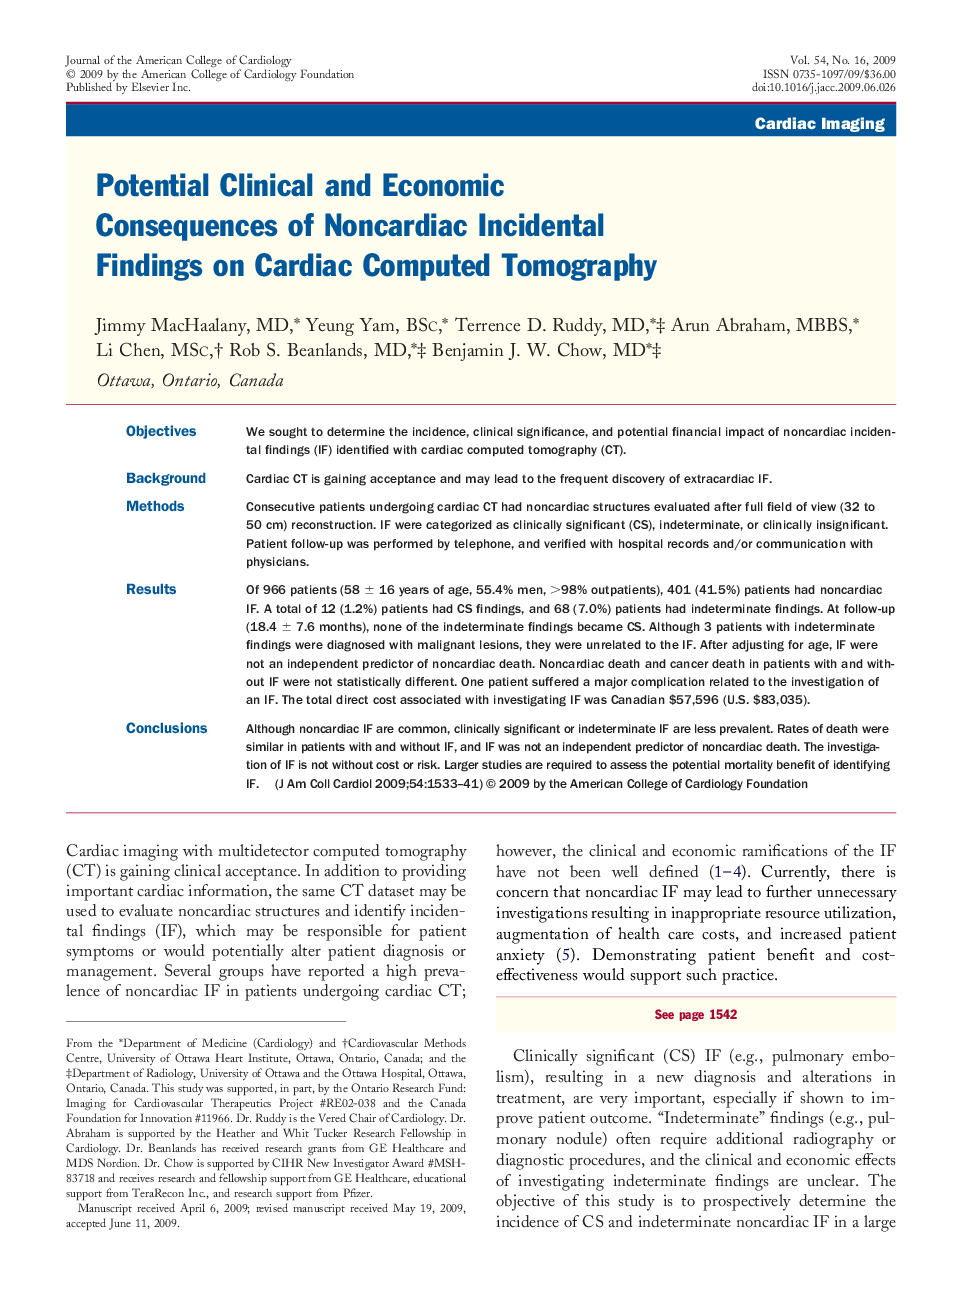 Potential Clinical and Economic Consequences of Noncardiac Incidental Findings on Cardiac Computed Tomography 